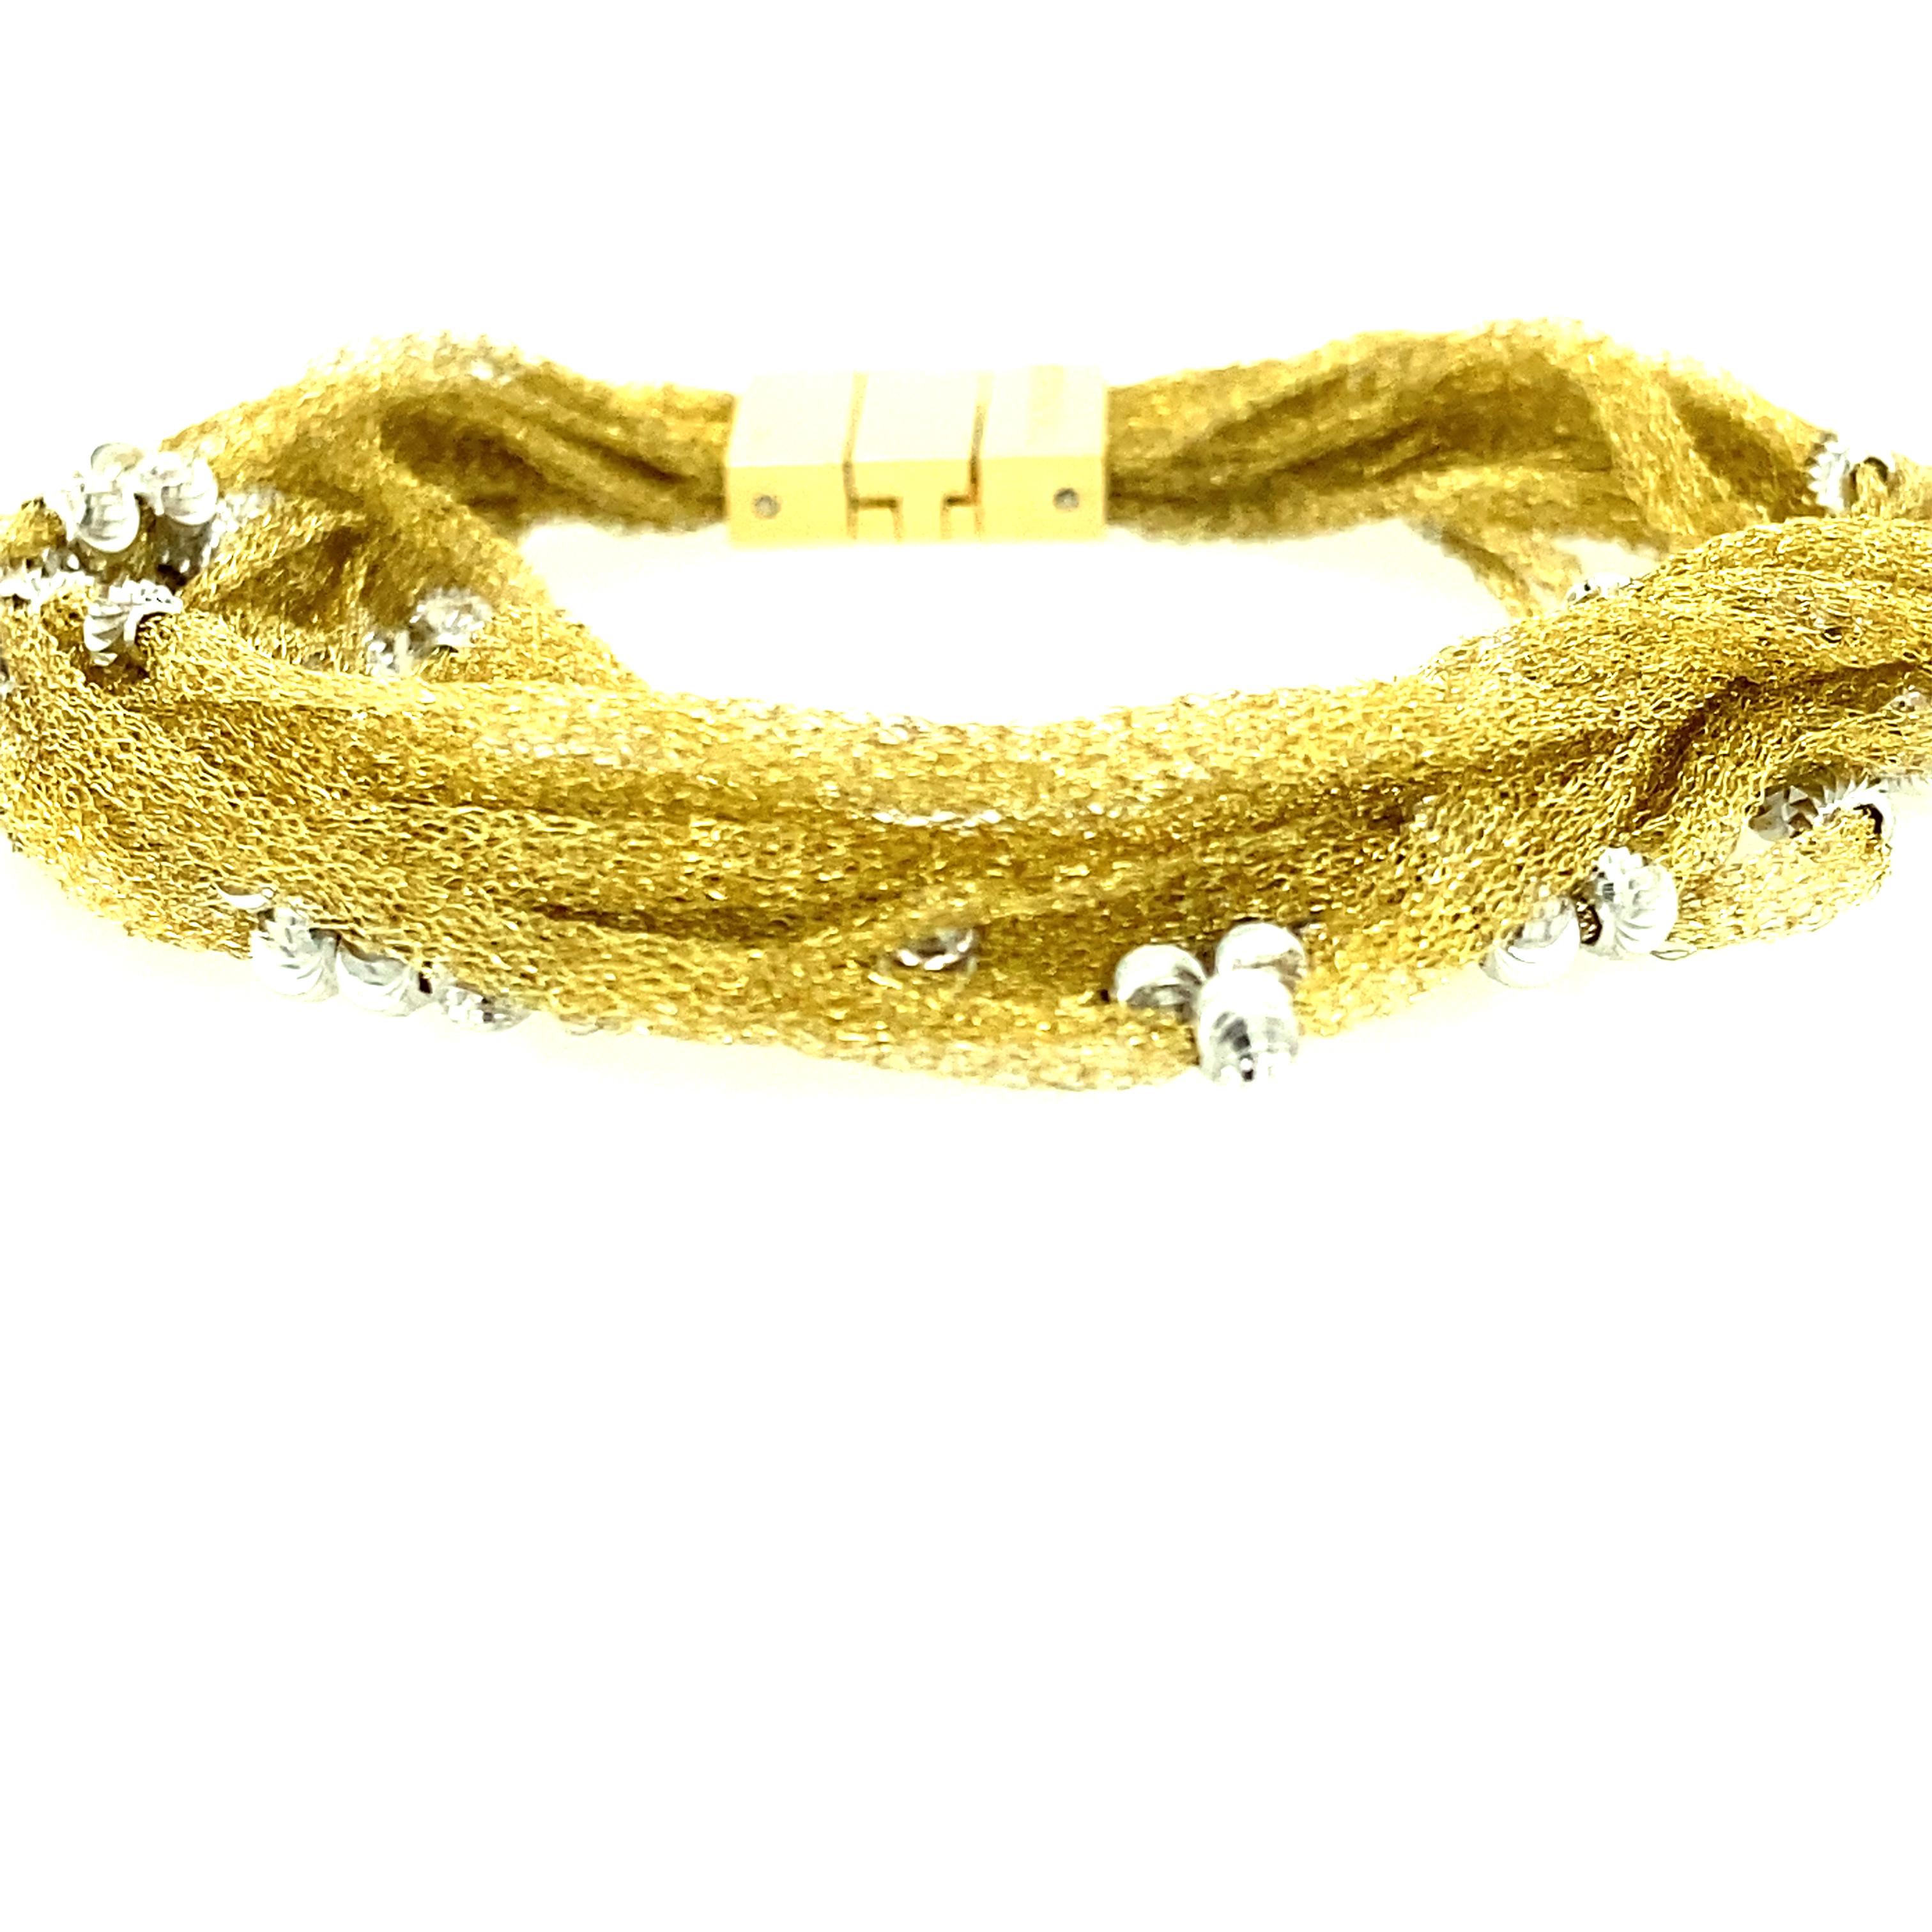 One 18 karat yellow gold (stamped 750 ITALY) multi strand mesh bracelet by Calgaro set with sterling silver beads.  The bracelet measures 7 inches long and is complete with a hidden closure clasp.